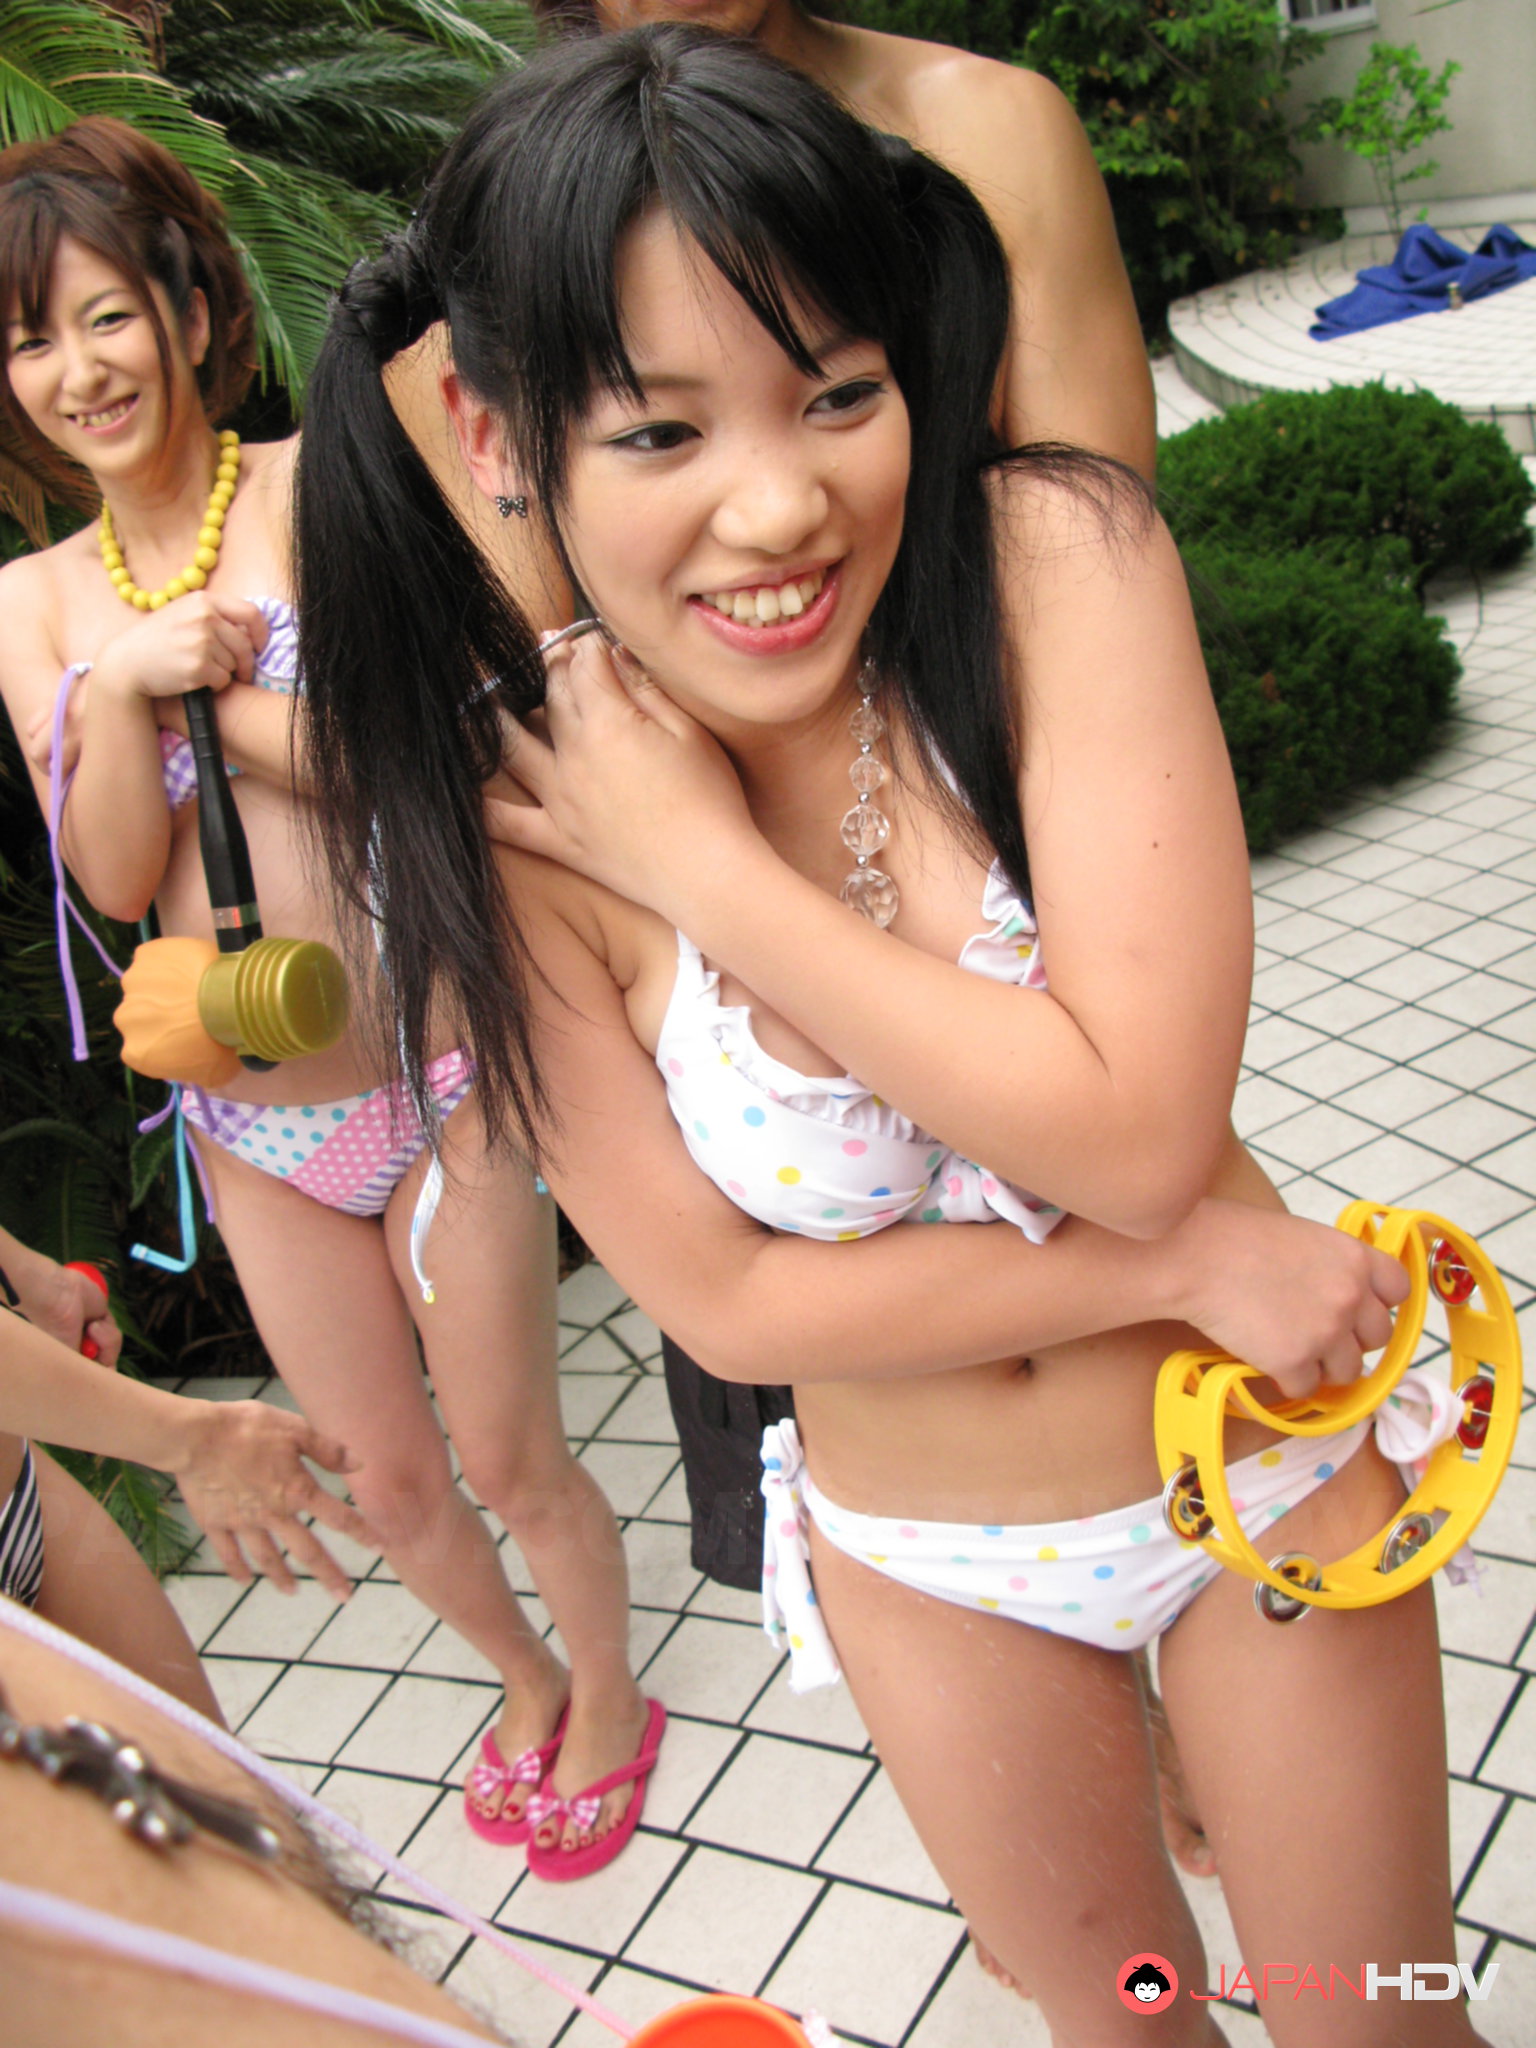 Pool Party Pussy - Japanese girls enjoy in some sexy pool party